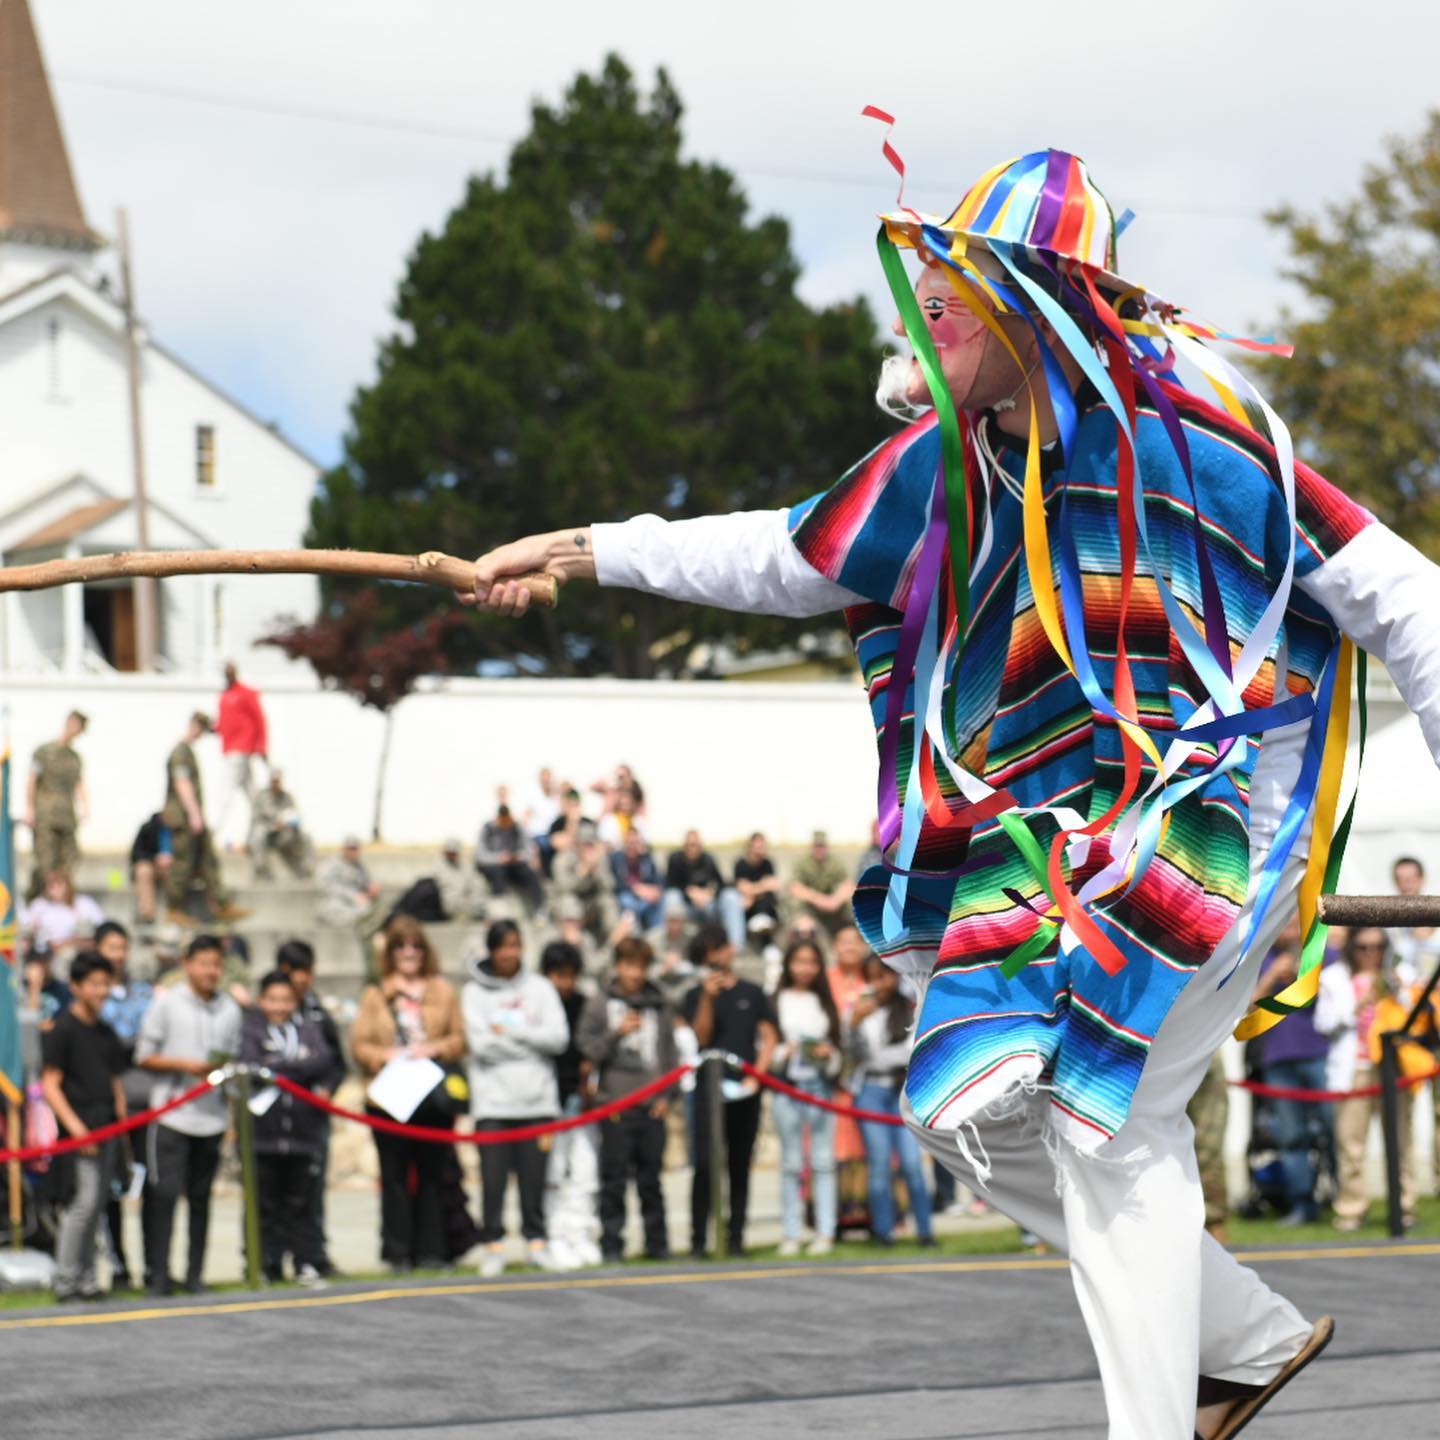 Thousands come to Language Day and learn the international language of dance